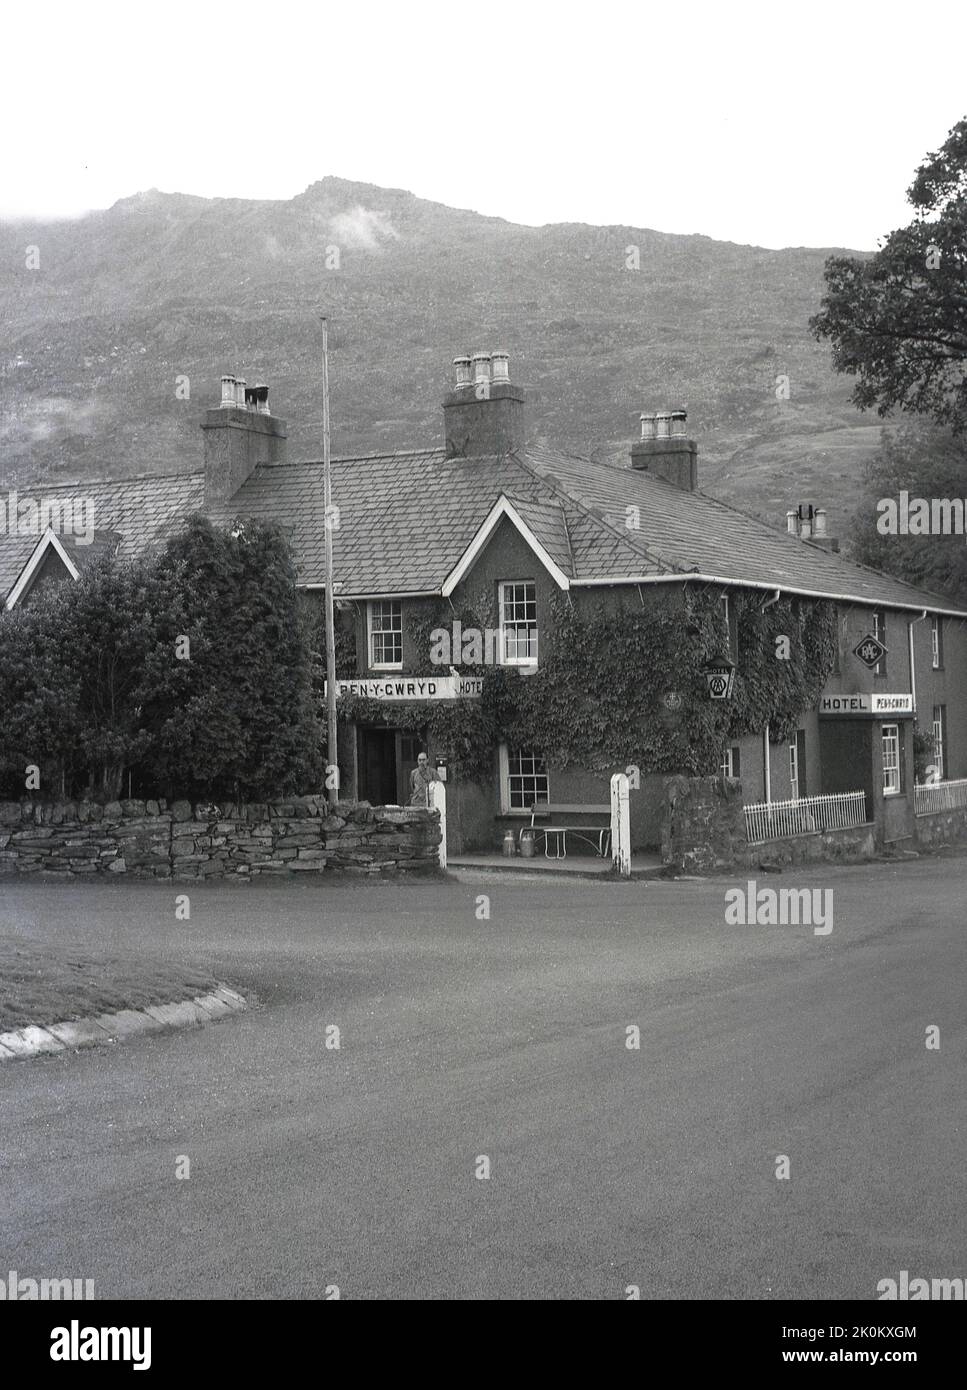 1956, historical, a gentleman standing outside the entrance to the Pen-y-Gwryd Hotel, Nant Gwynant, Caernarfon, Wales, UK. Situated in a valley in Snowdonia, it was a stone farmhouse when built in 1810 and later became an inn catering for walkers and climbers visiting Snowdonia.  In 1953, it was Sir Edmund Hillary's training base before his successful Mount Everest ascent. Stock Photo